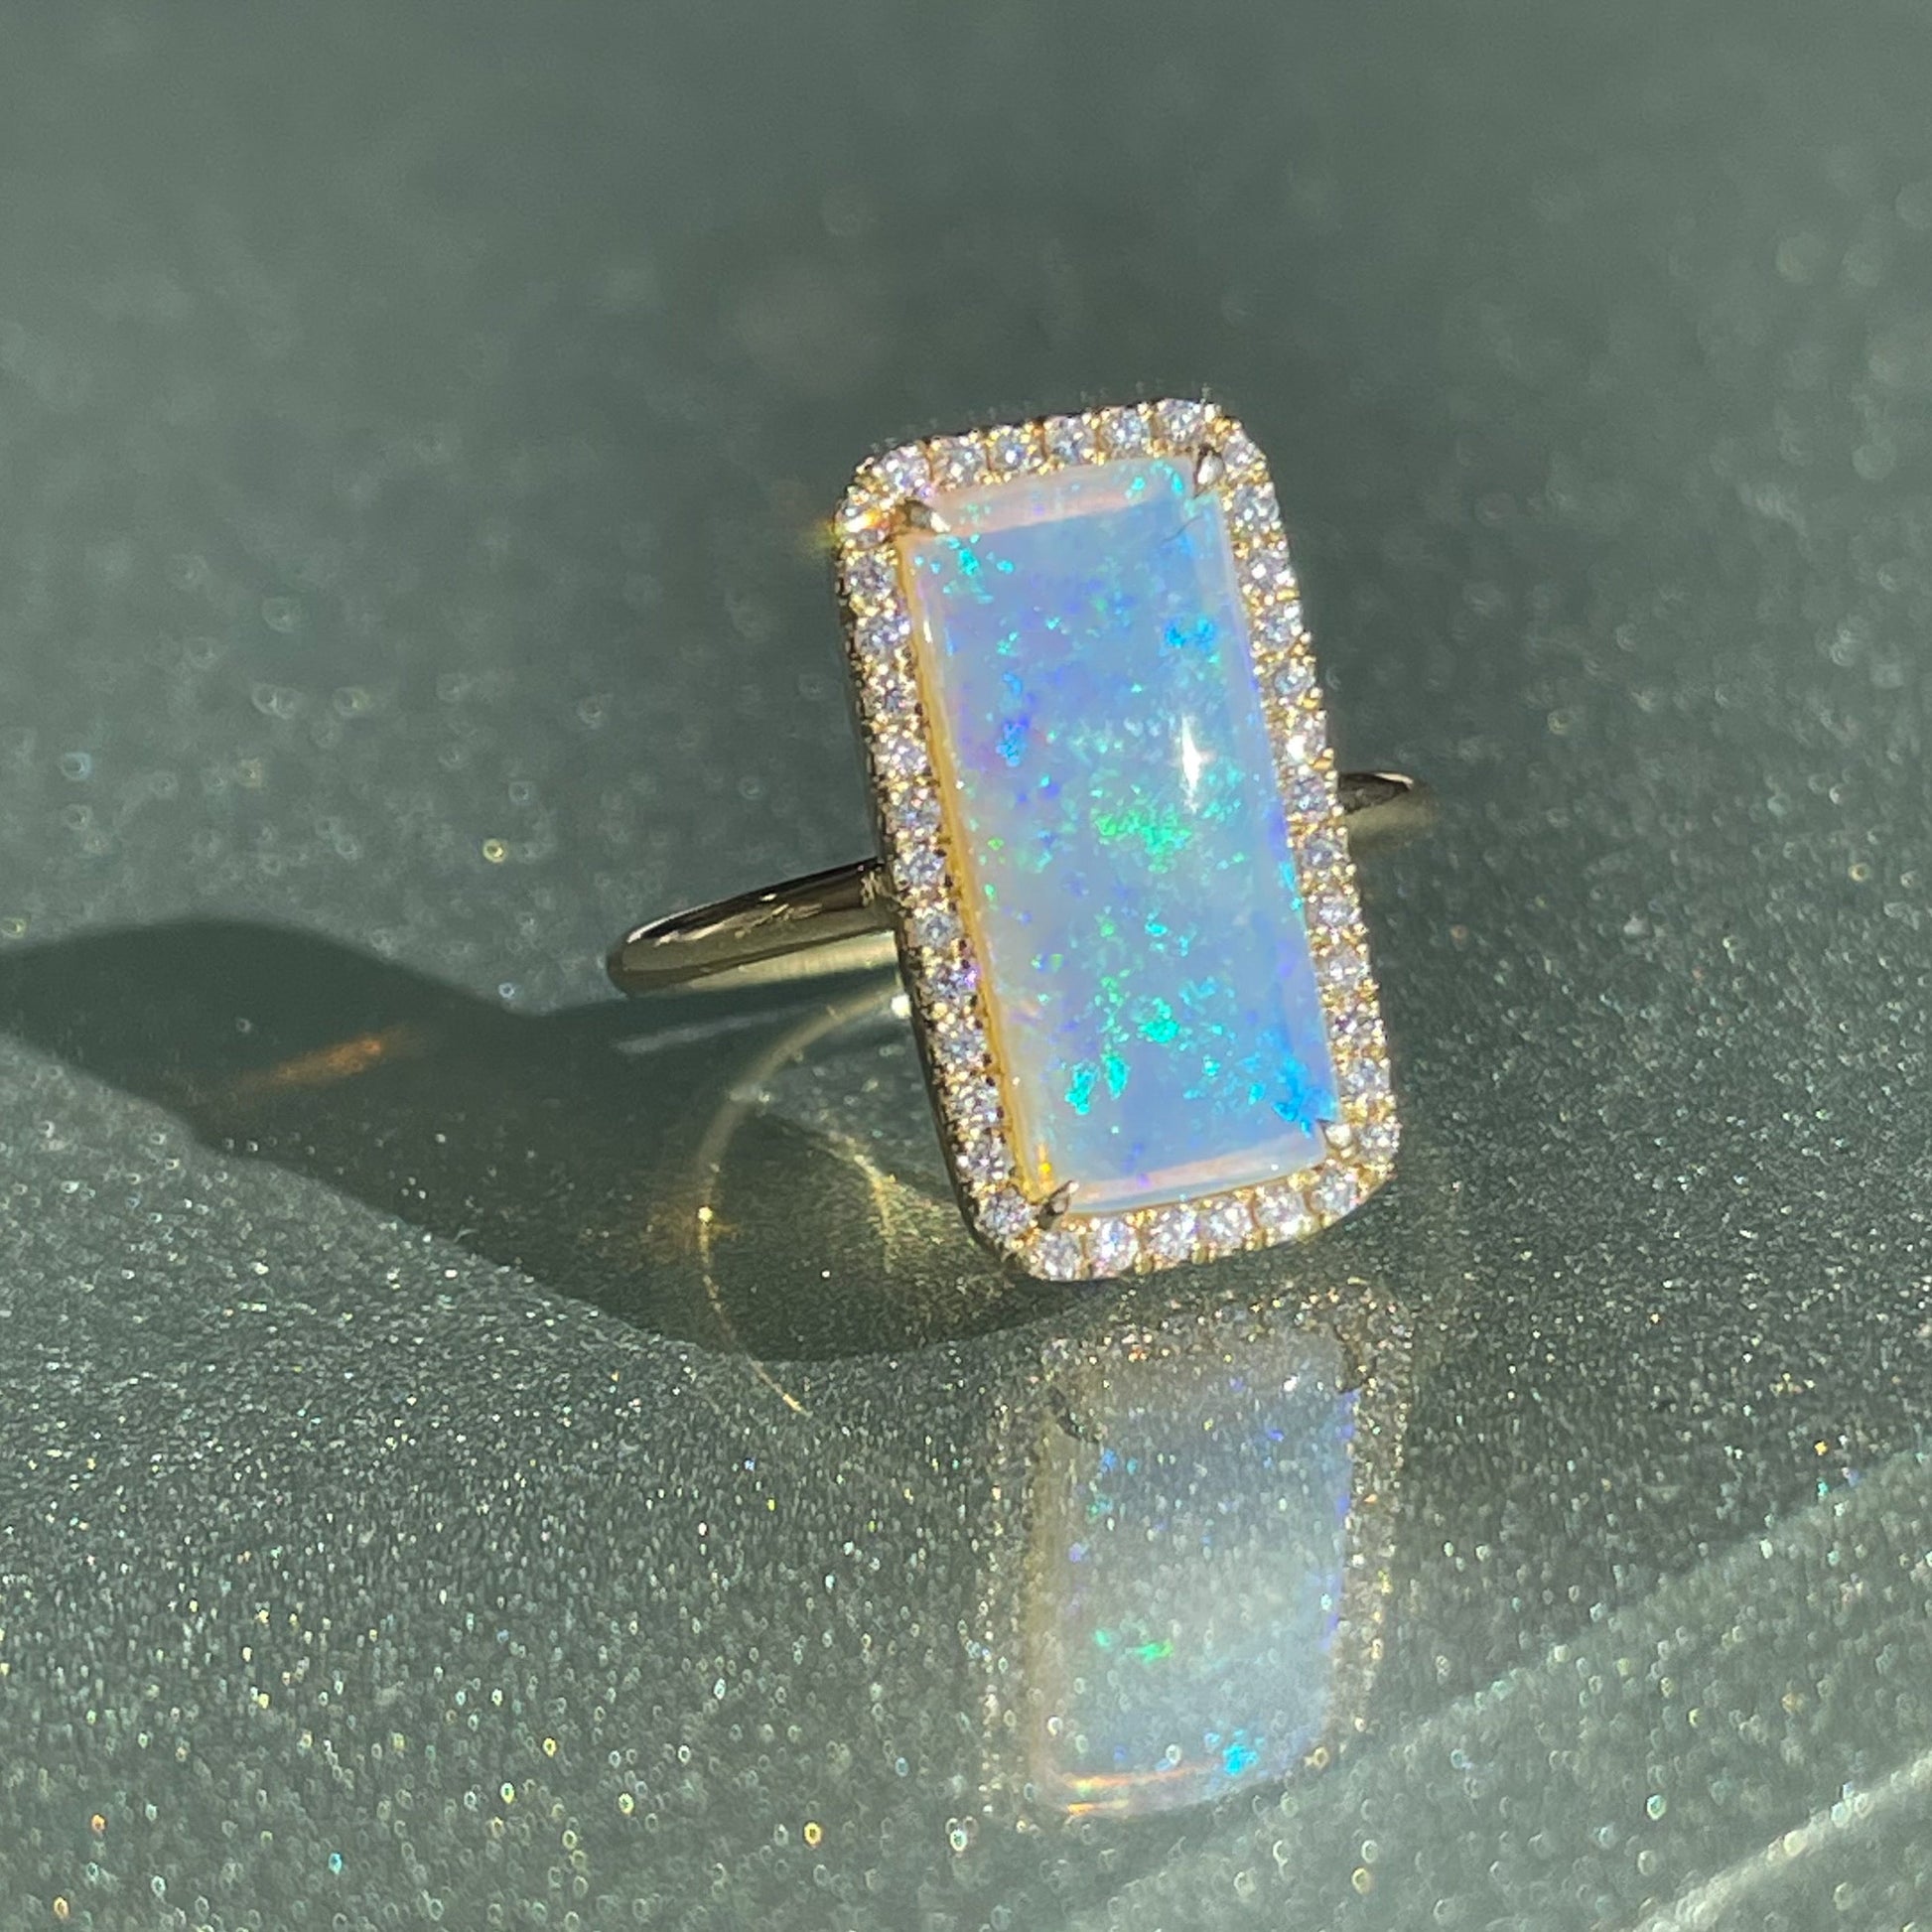 An Australian Opal Ring by NIXIN Jewelry resting on a tabletop. A blue green opal set in 14k yellow gold.